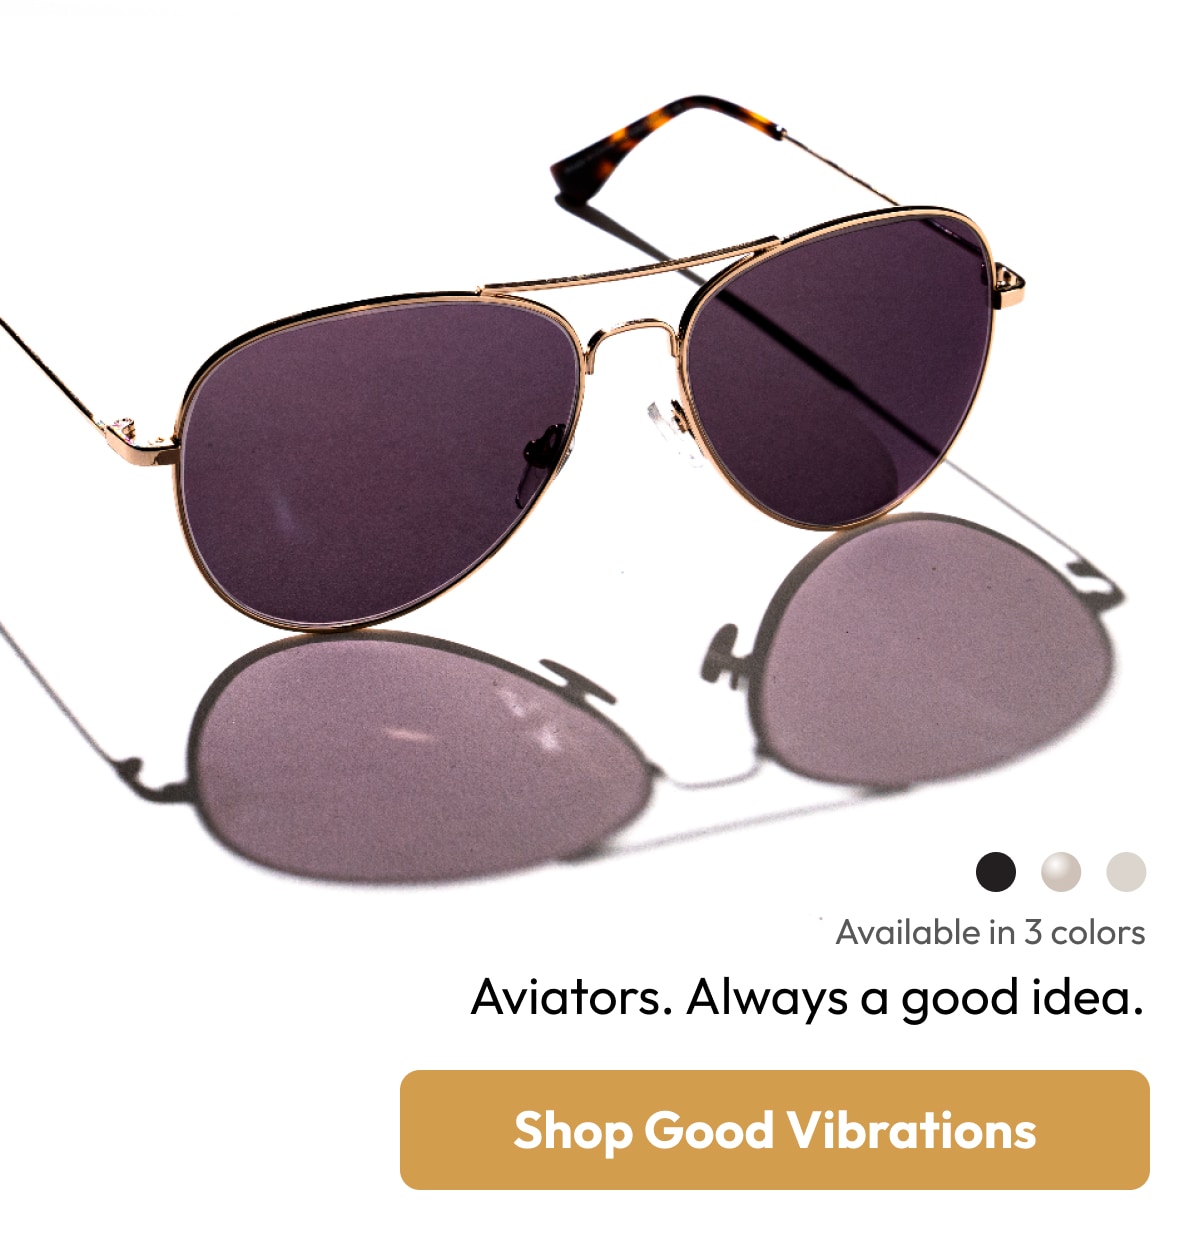  Available in 3 colors Aviators. Always a good idea. 